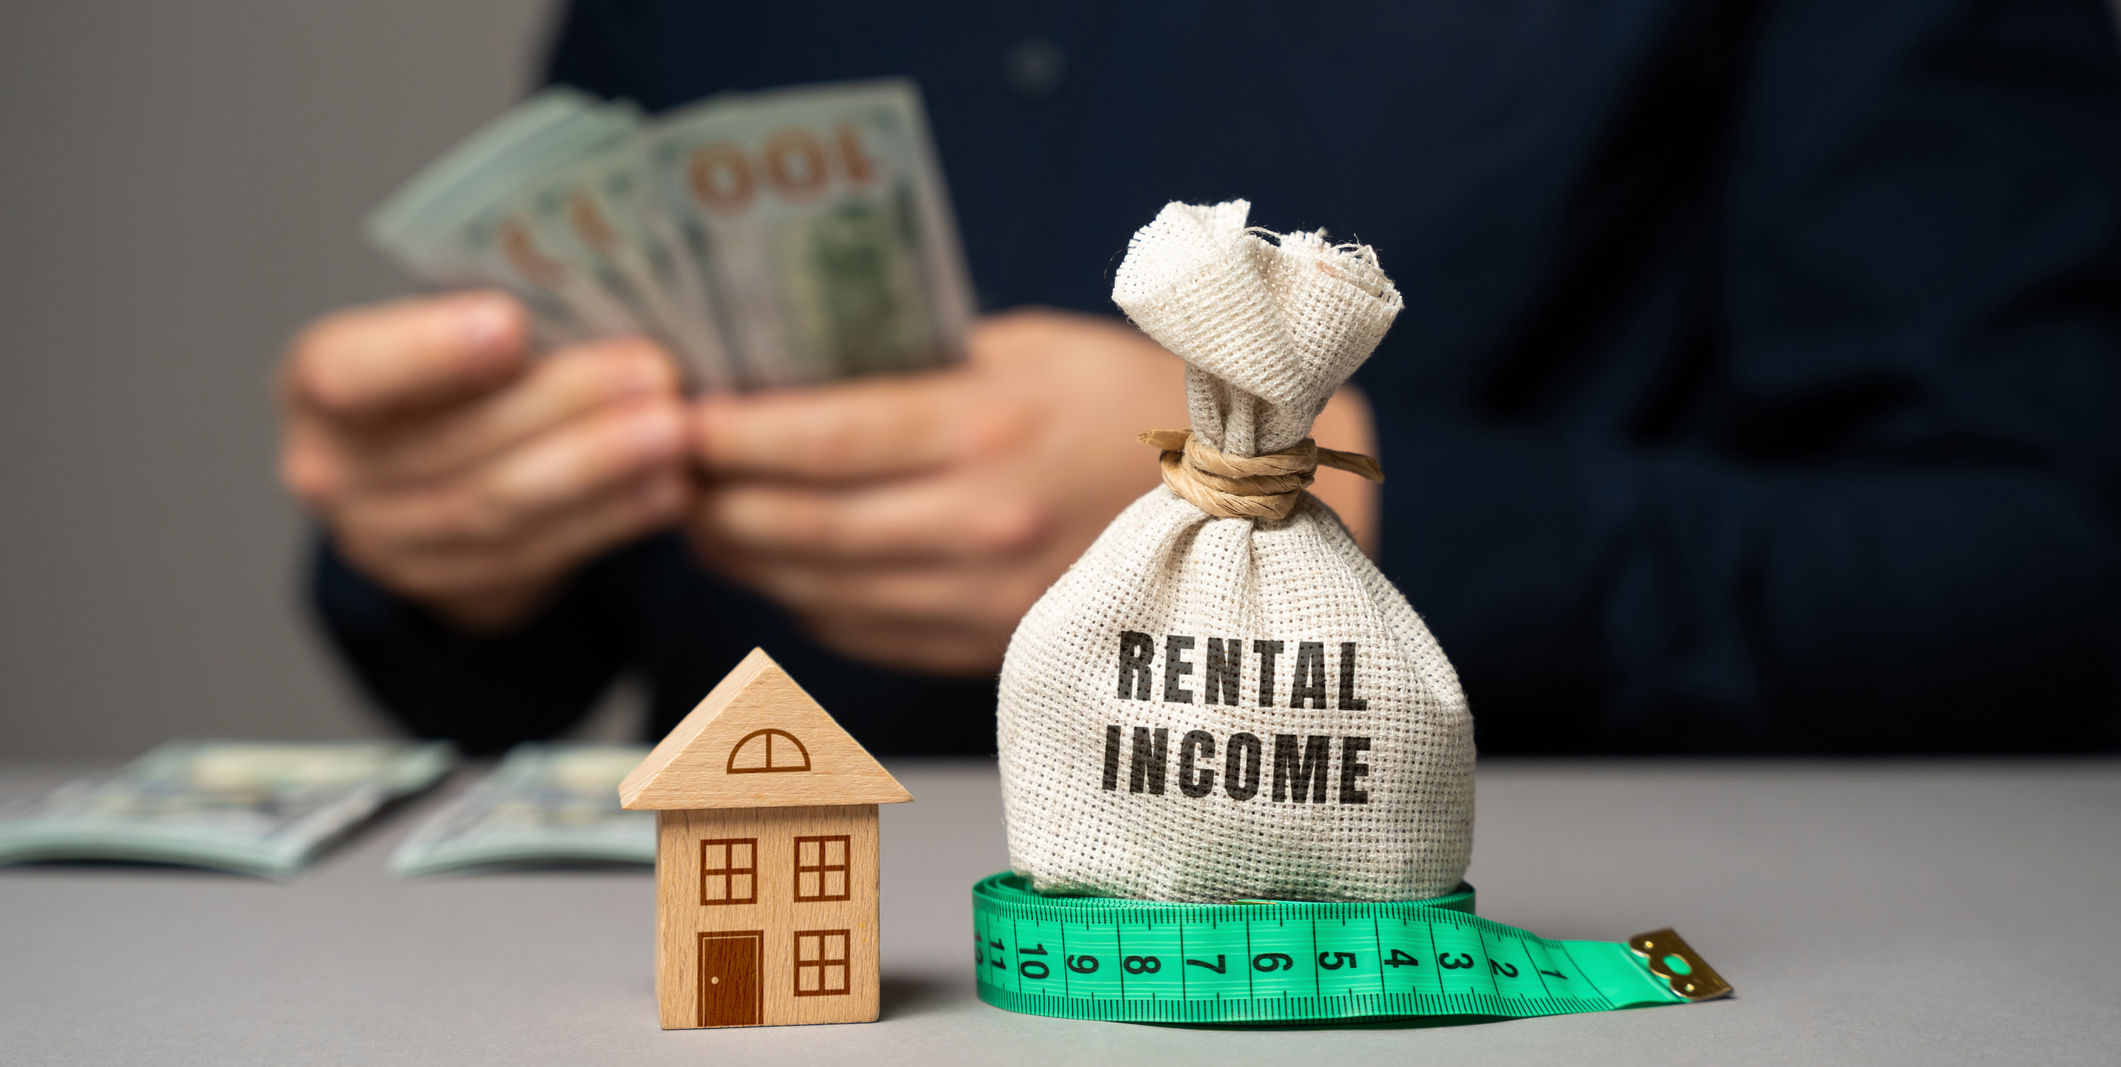 A person counting rental income